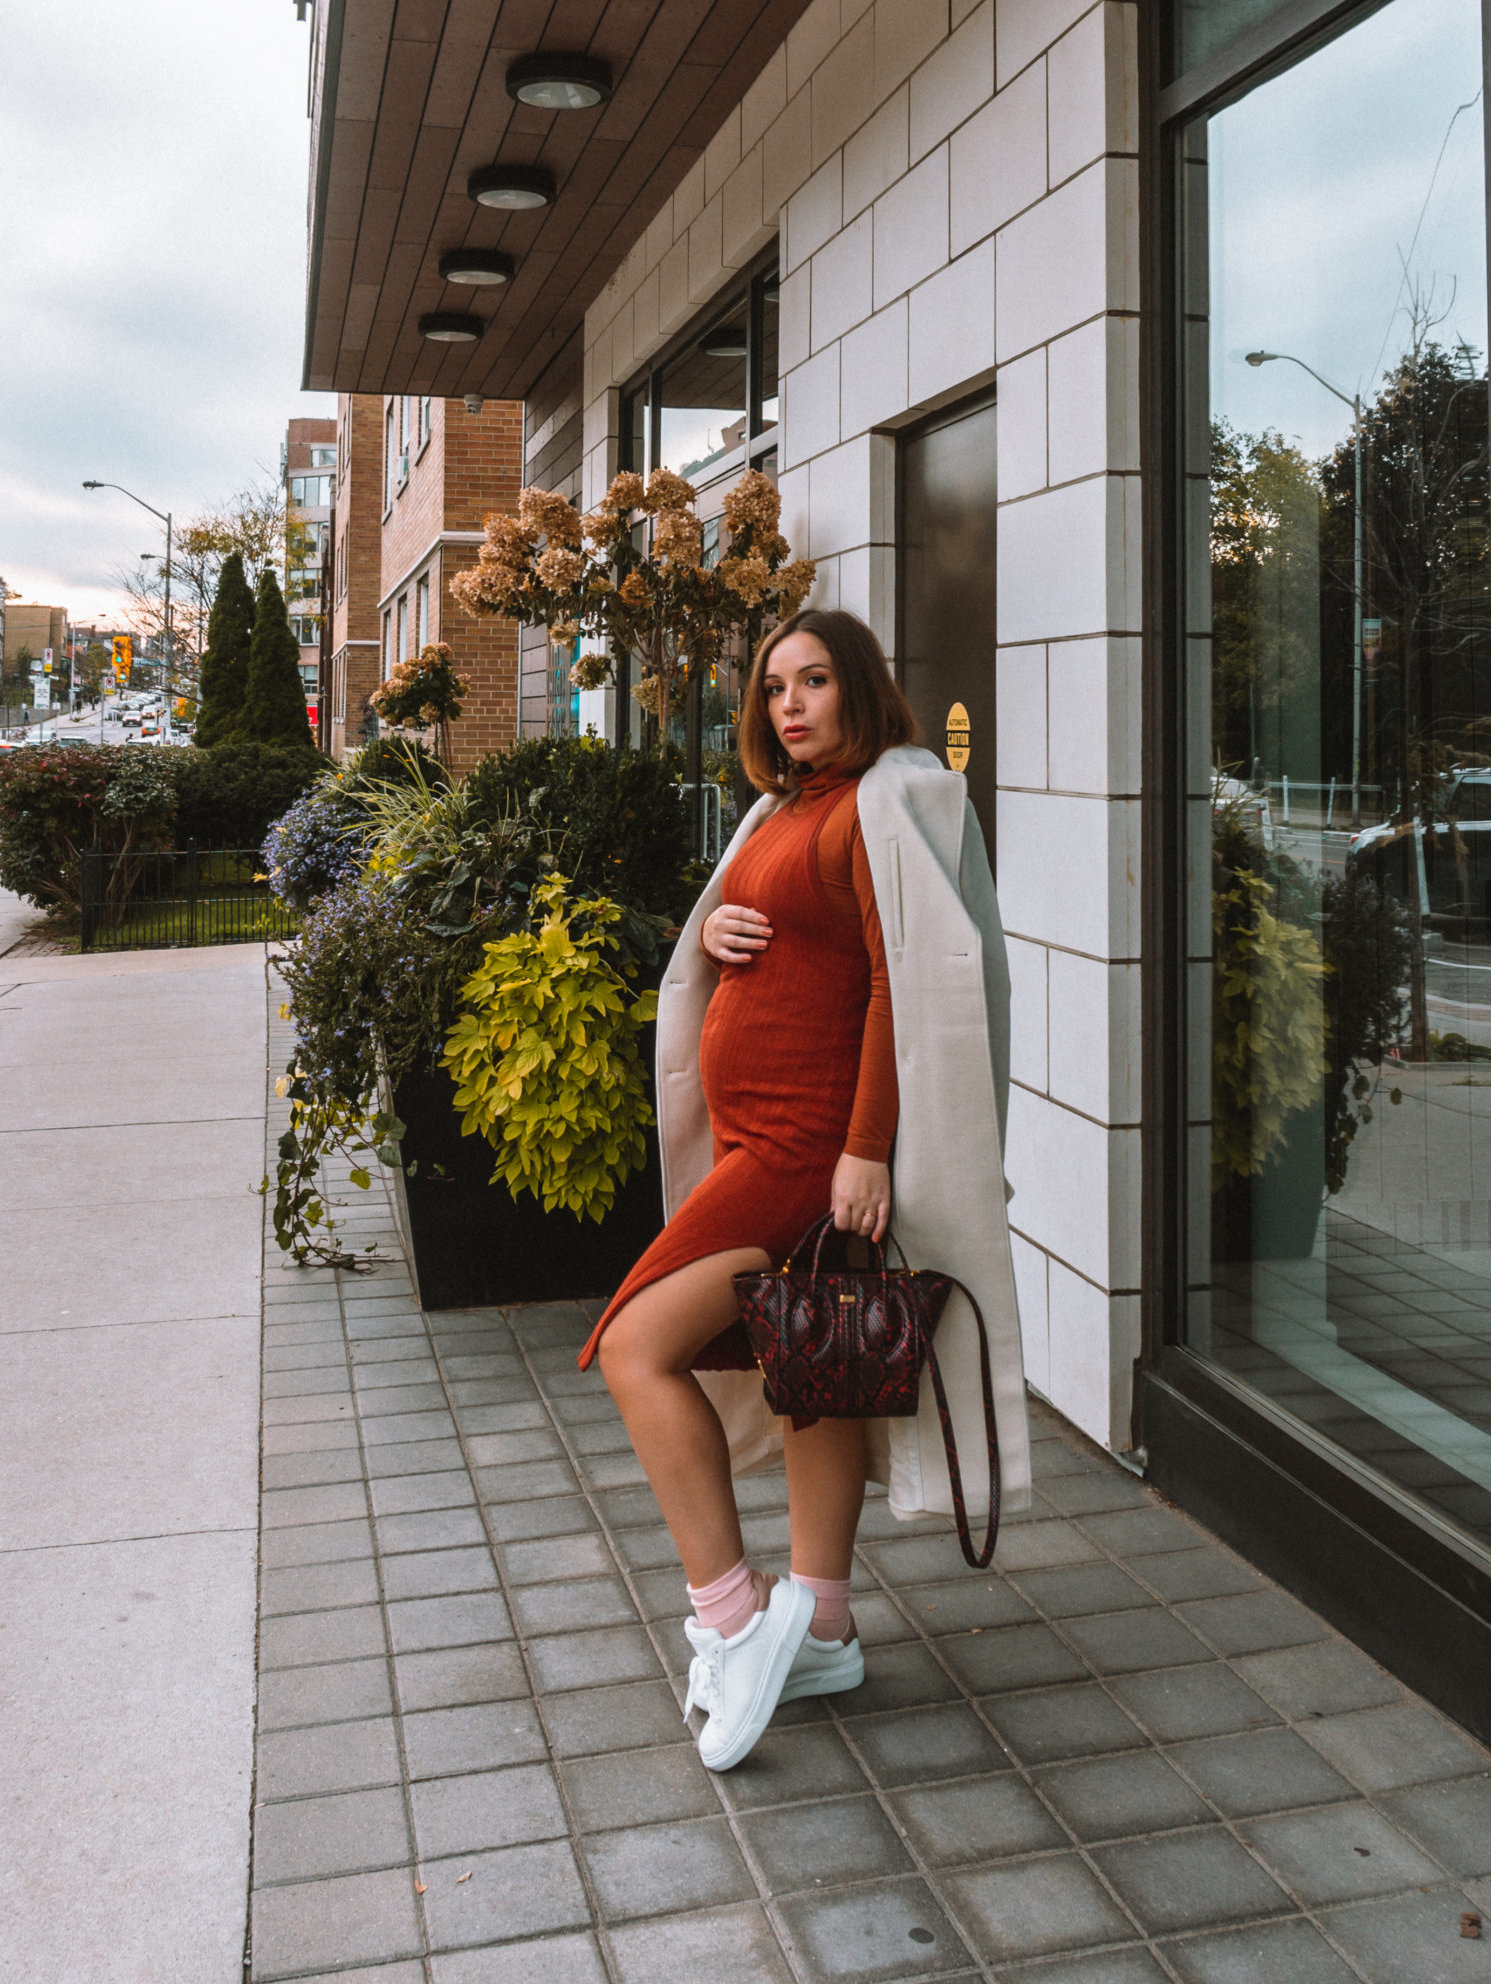 Alexandra K Sneaker Review + My Go-To Maternity Look